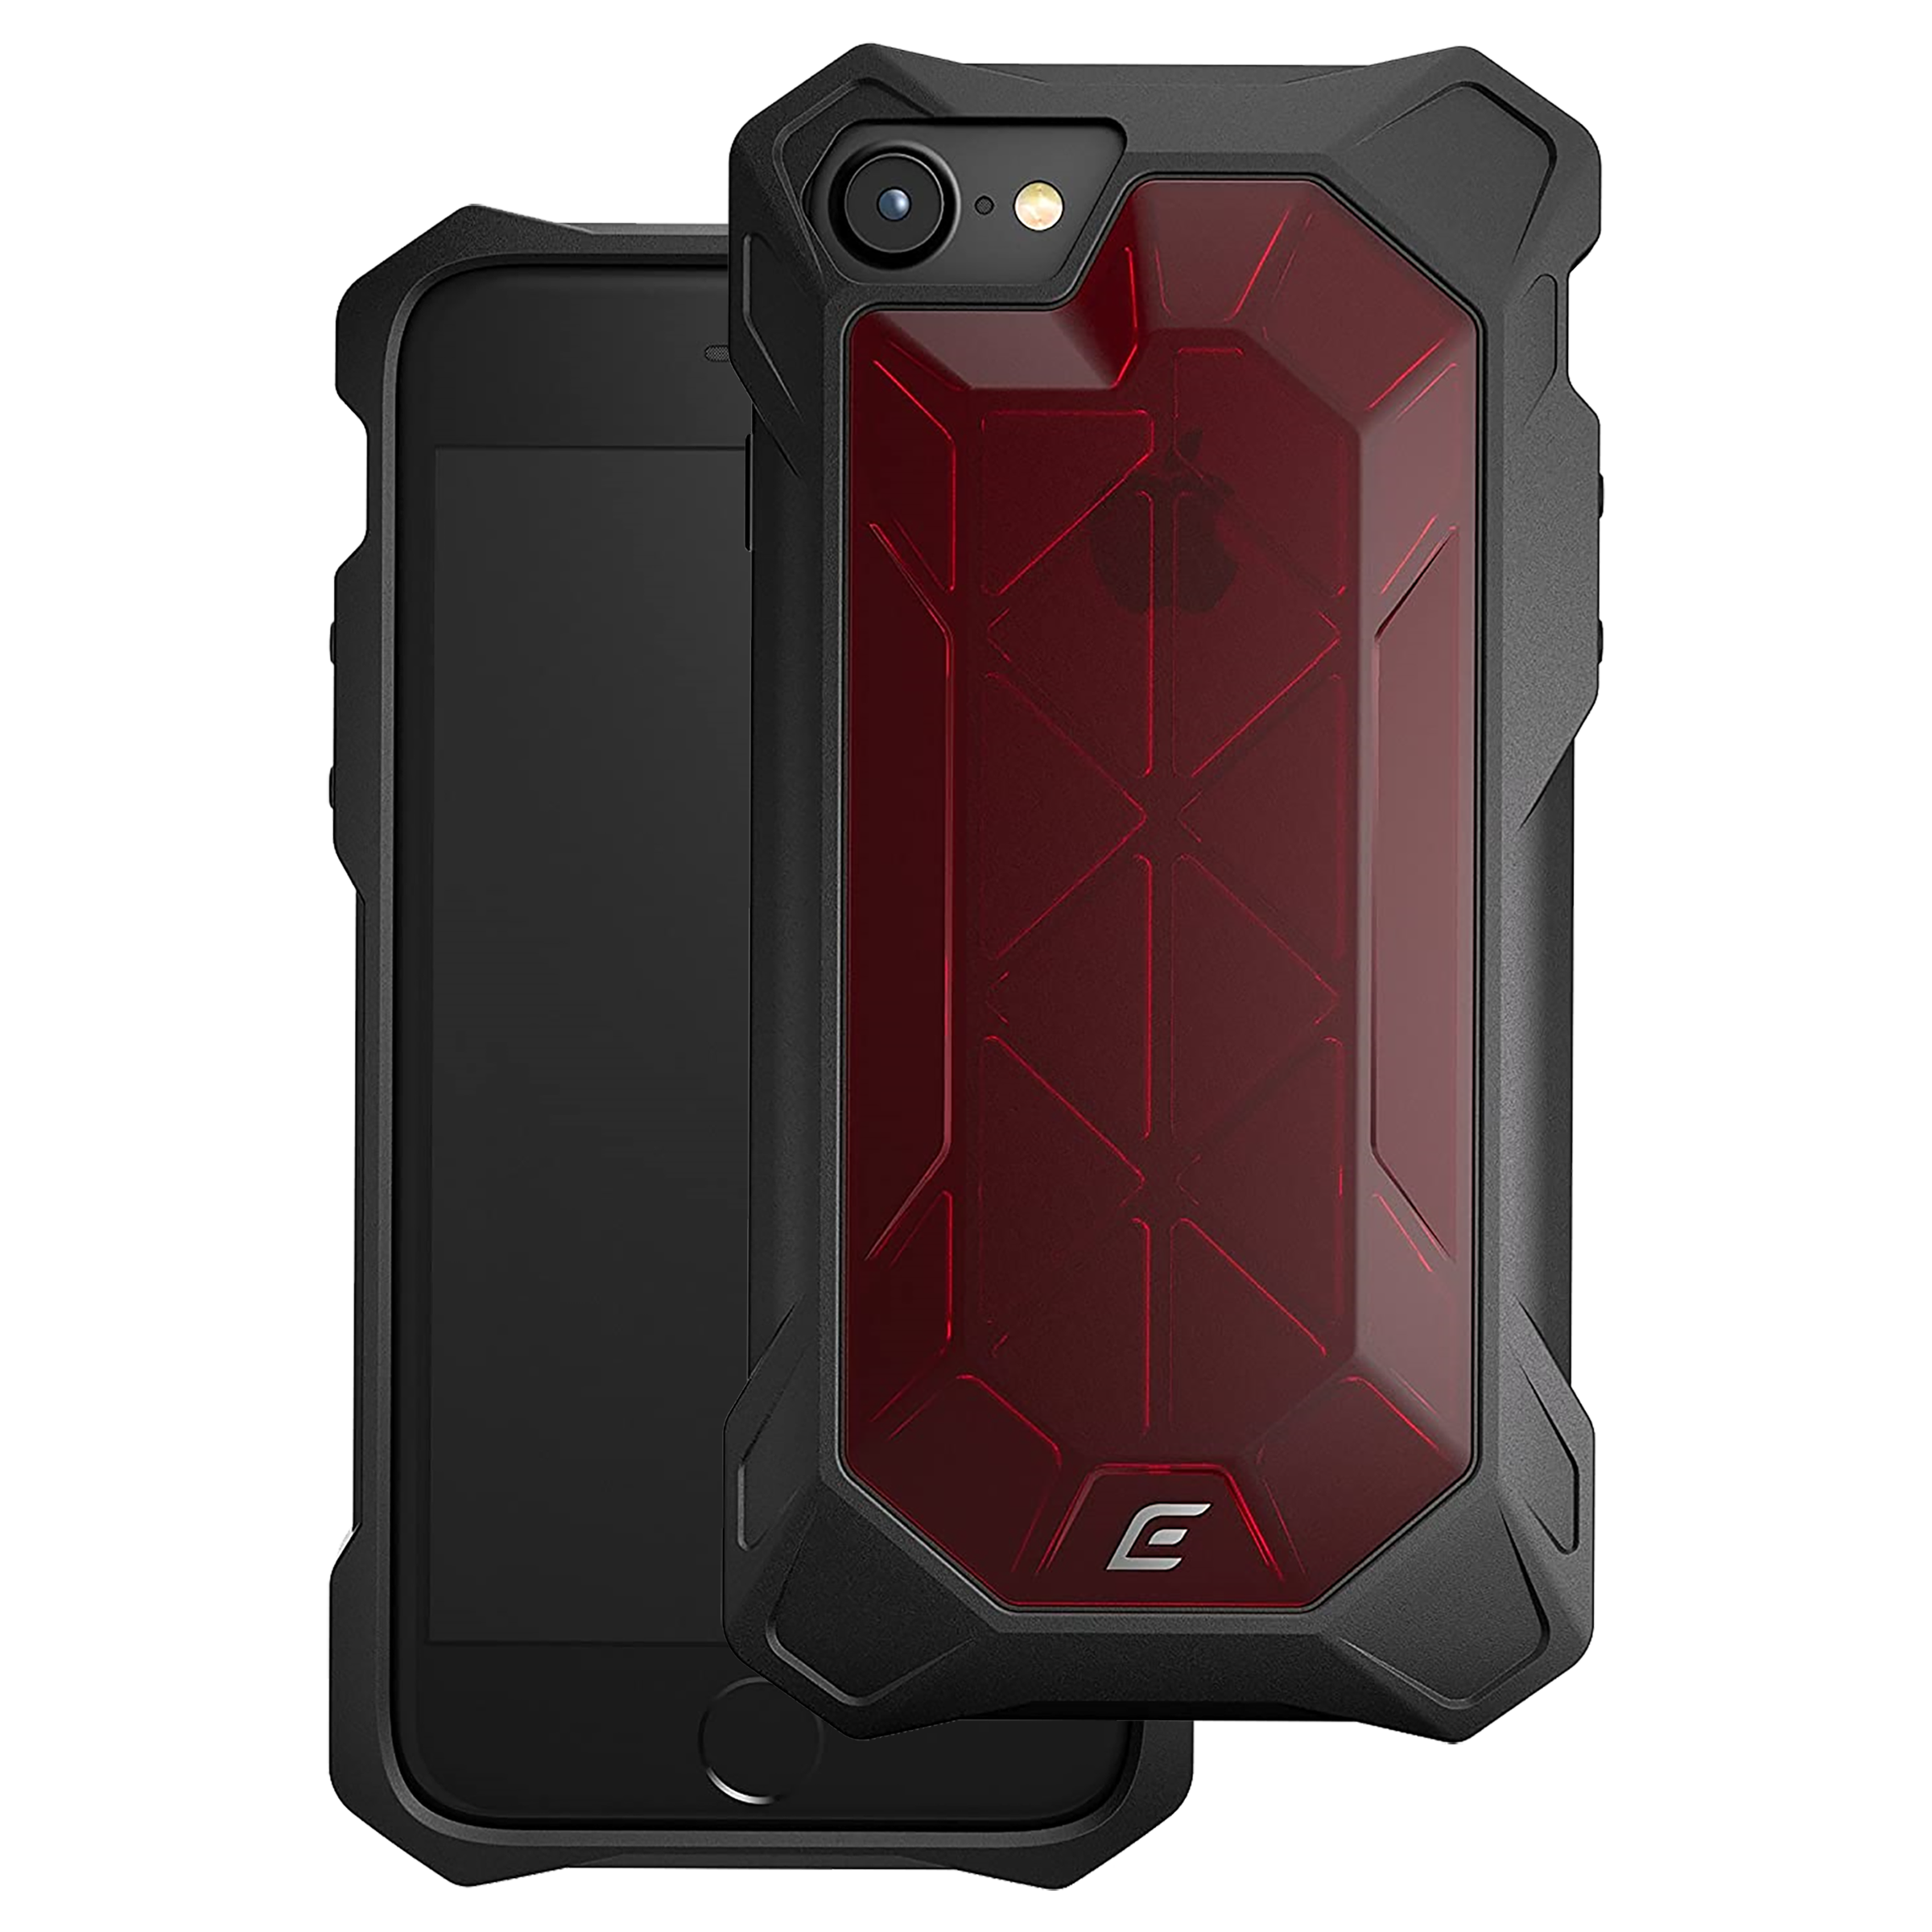 Element Case REV Polycarbonate Back Case For iPhone 7 / 8 (High Impact Protection, EMT-322-152DZ-03, Red)_1